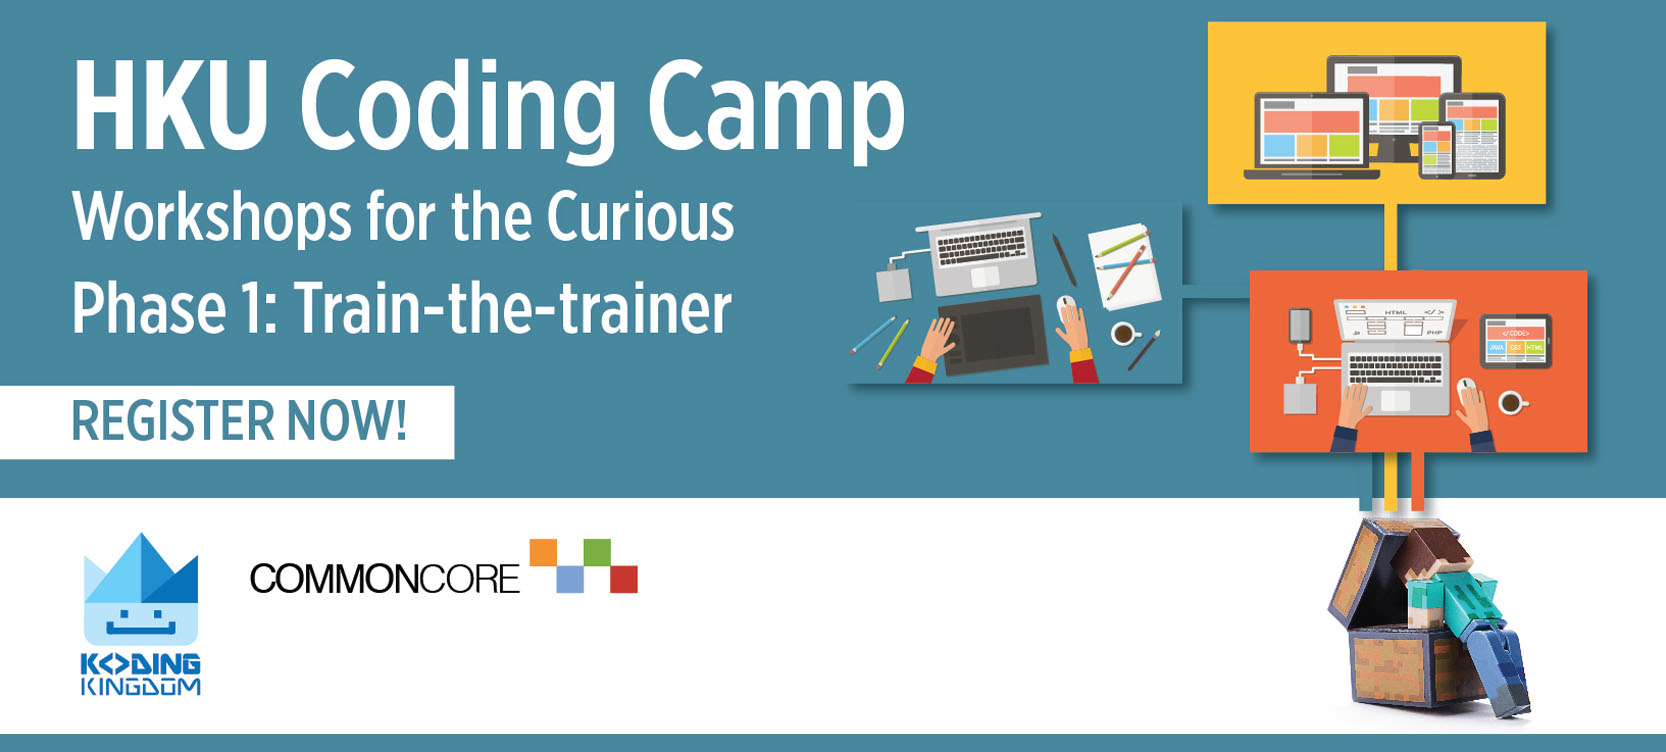 Coding Camp Poster 20151020-01